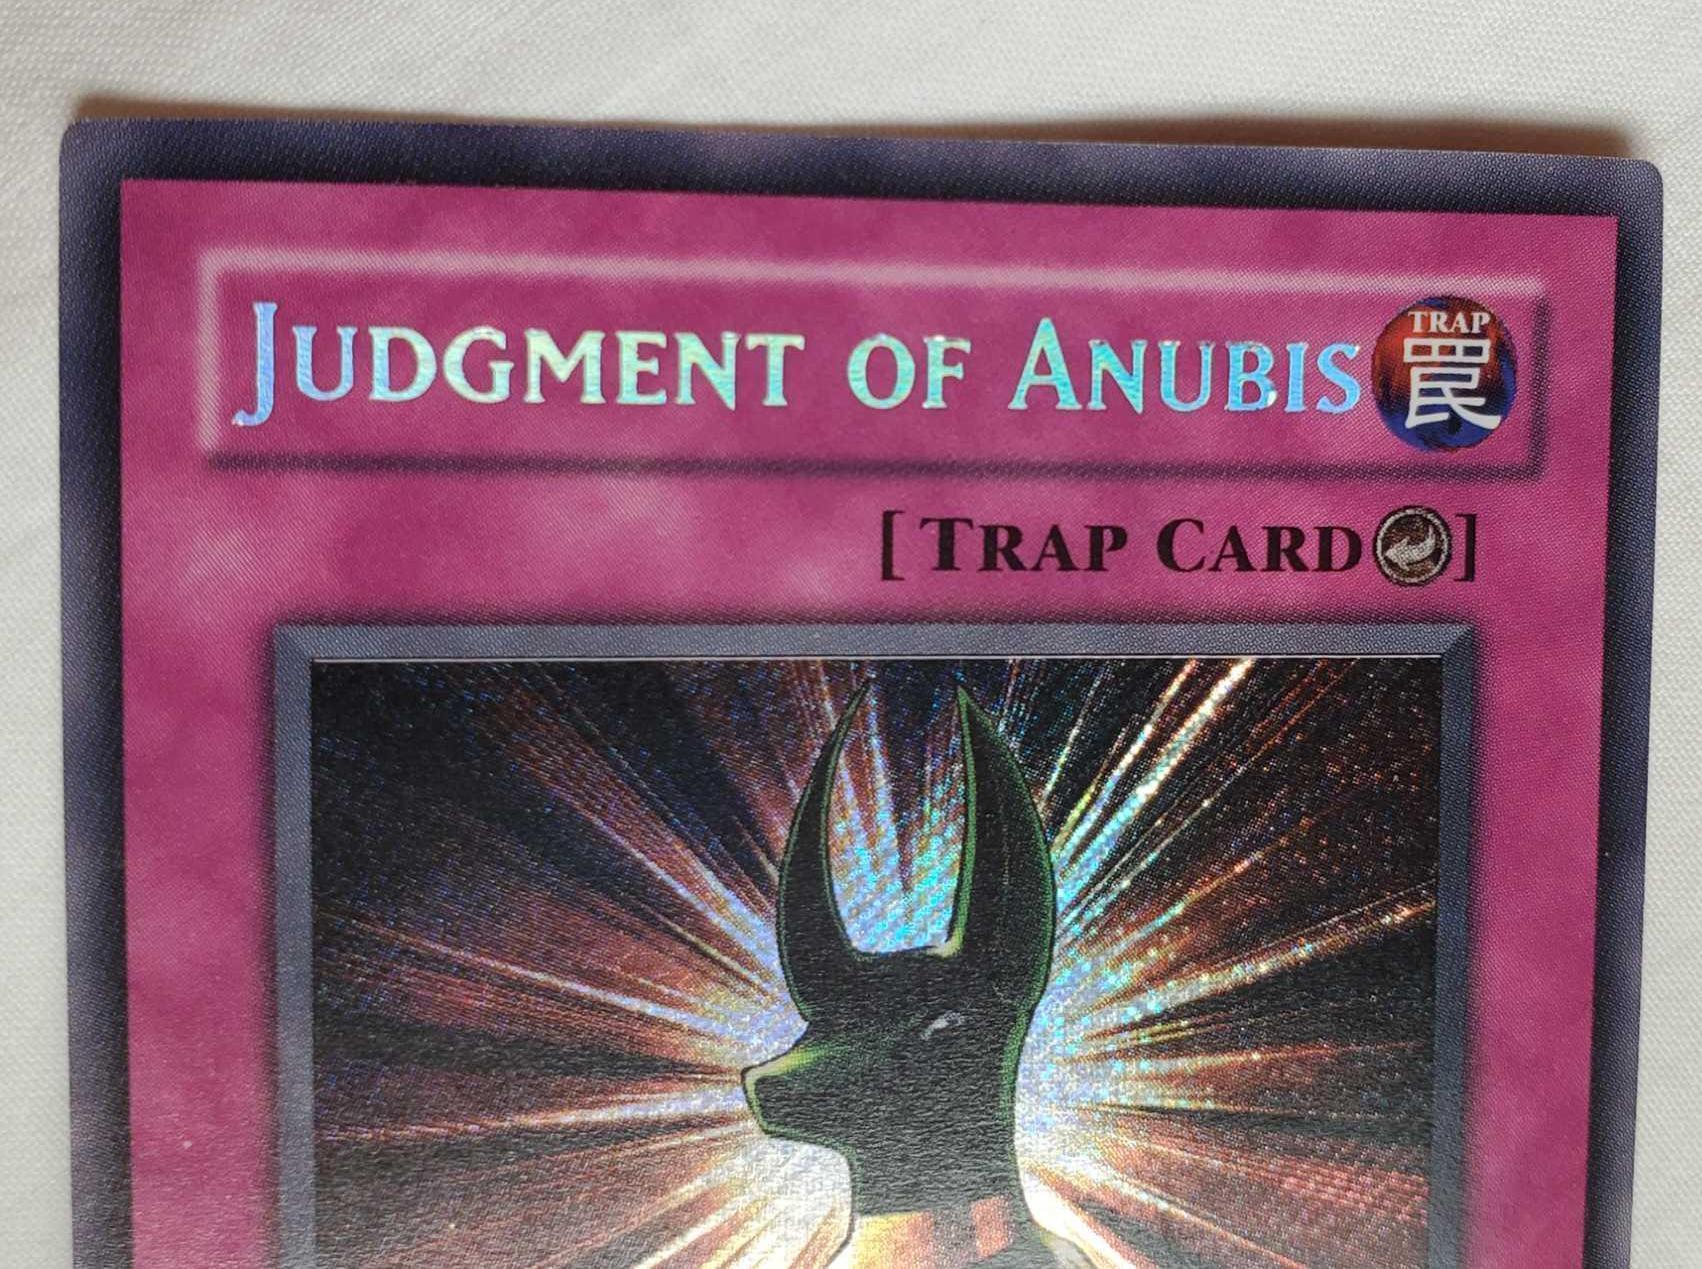 3 Pairs of Dark Crisis 2003/4 Yugioh Secret and Ultra Rare Trading Cards, Most First Edition